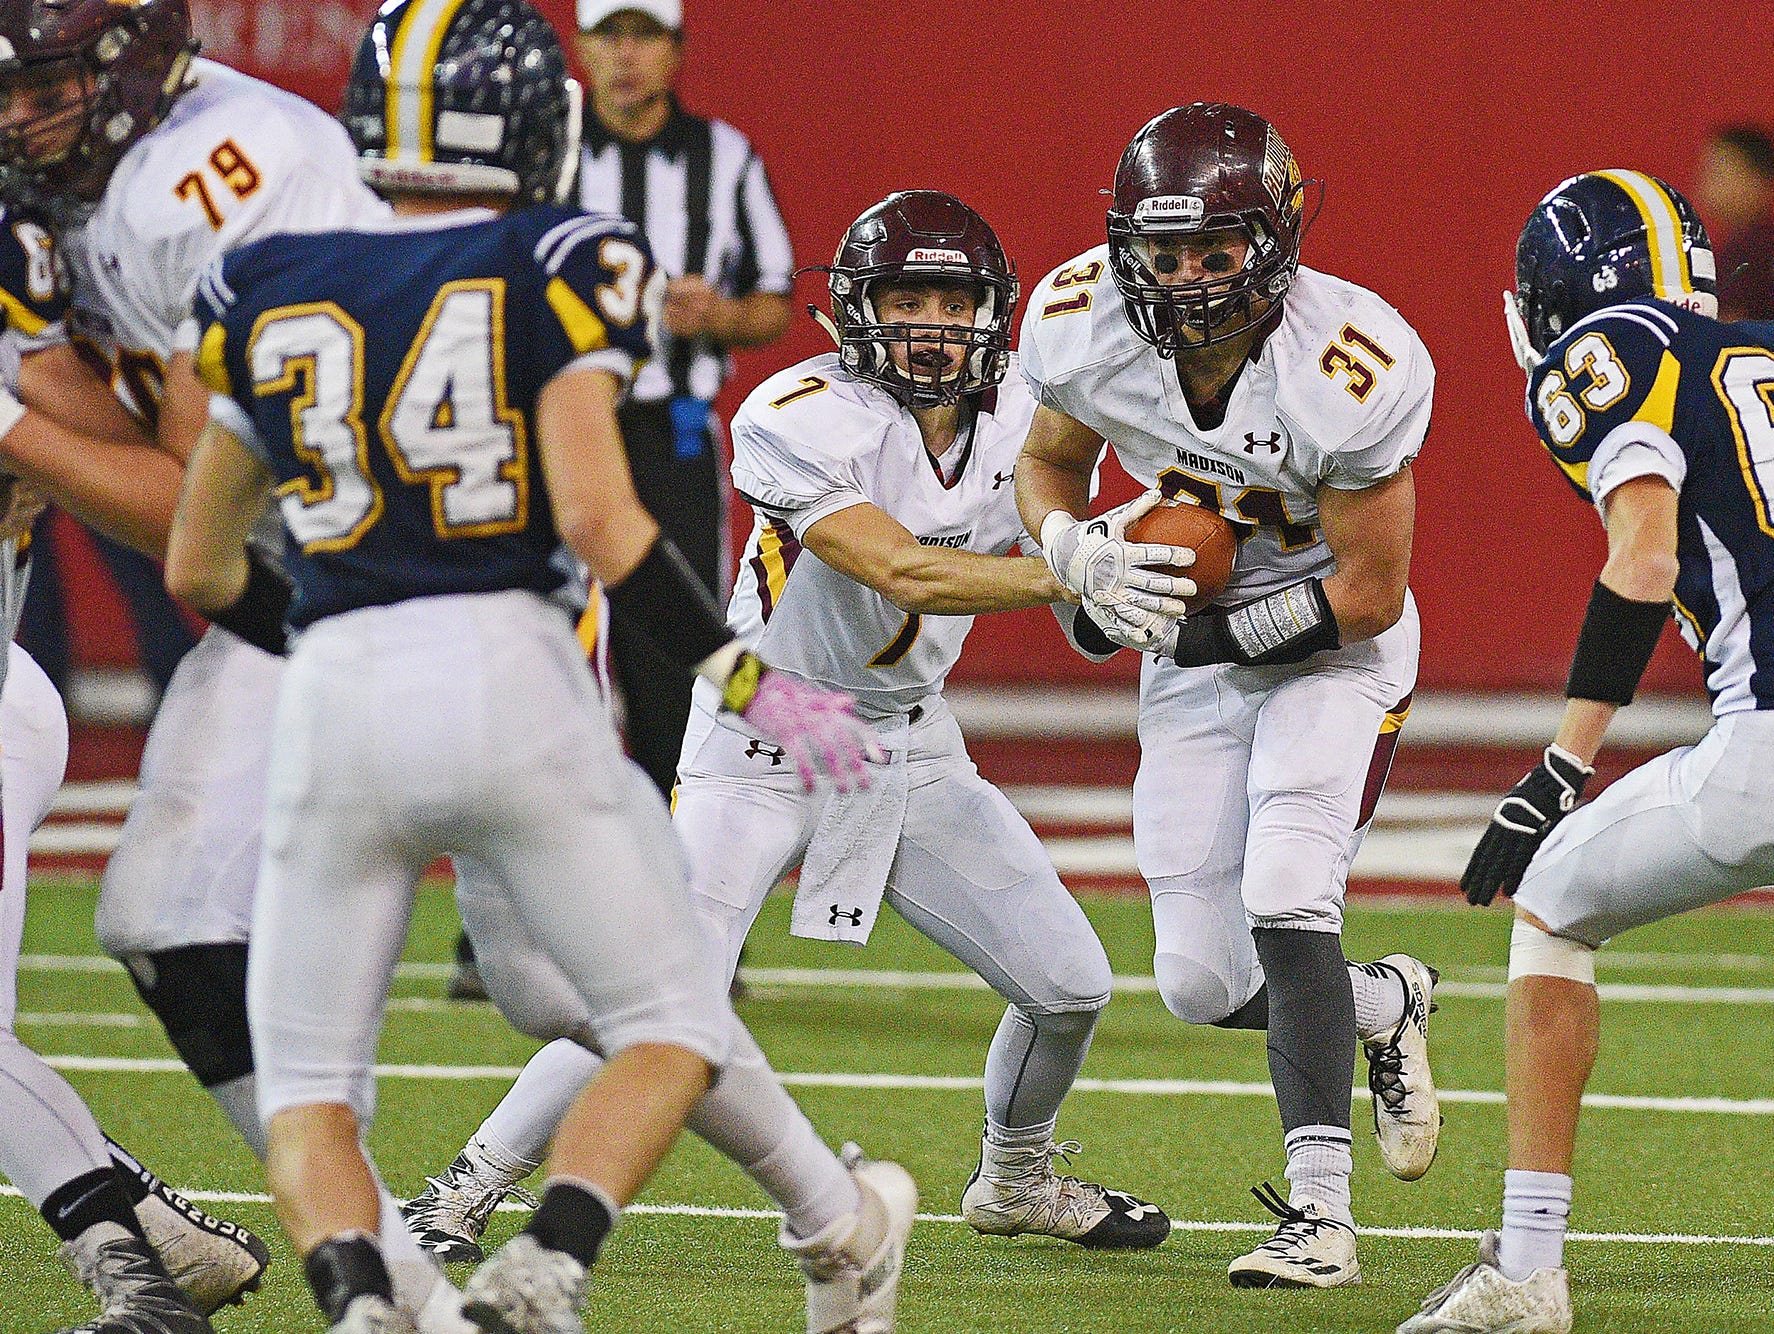 Madison's Riley Janke (31) carries the ball during the 2016 South Dakota State Class 11A Football Championship game against Tea Area Saturday, Nov. 12, 2016, at the DakotaDome on the University of South Dakota campus in Vermillion, S.D. Madison beat Tea Area 39-0.